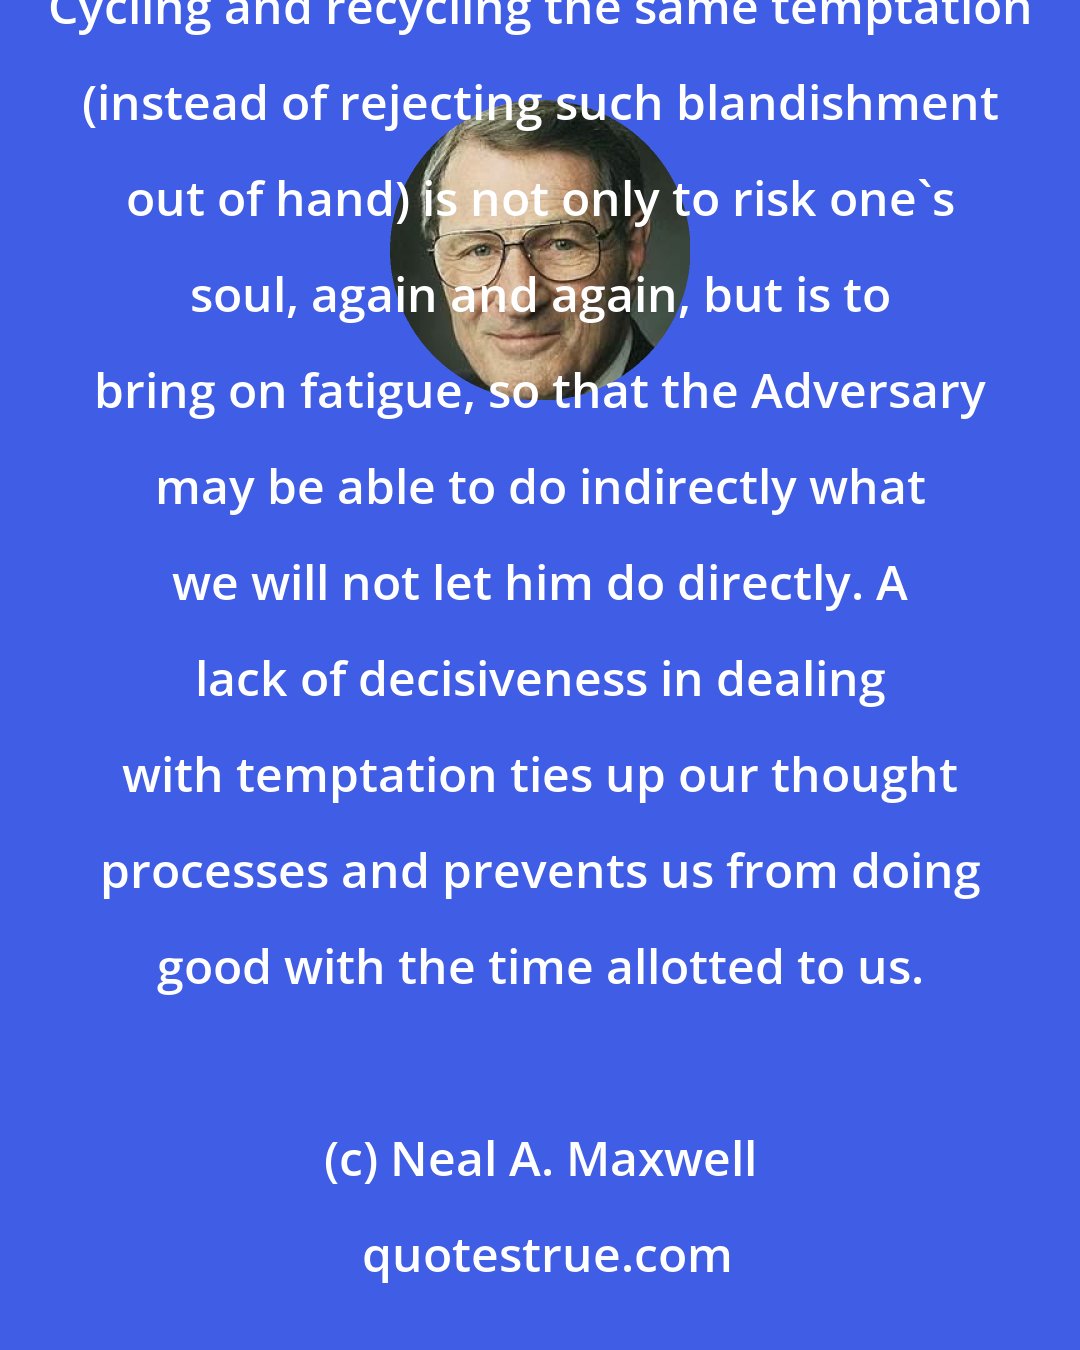 Neal A. Maxwell: Time Management Tips: The perpetual processing of the same temptation is both dangerous and time-wasting. Cycling and recycling the same temptation (instead of rejecting such blandishment out of hand) is not only to risk one's soul, again and again, but is to bring on fatigue, so that the Adversary may be able to do indirectly what we will not let him do directly. A lack of decisiveness in dealing with temptation ties up our thought processes and prevents us from doing good with the time allotted to us.